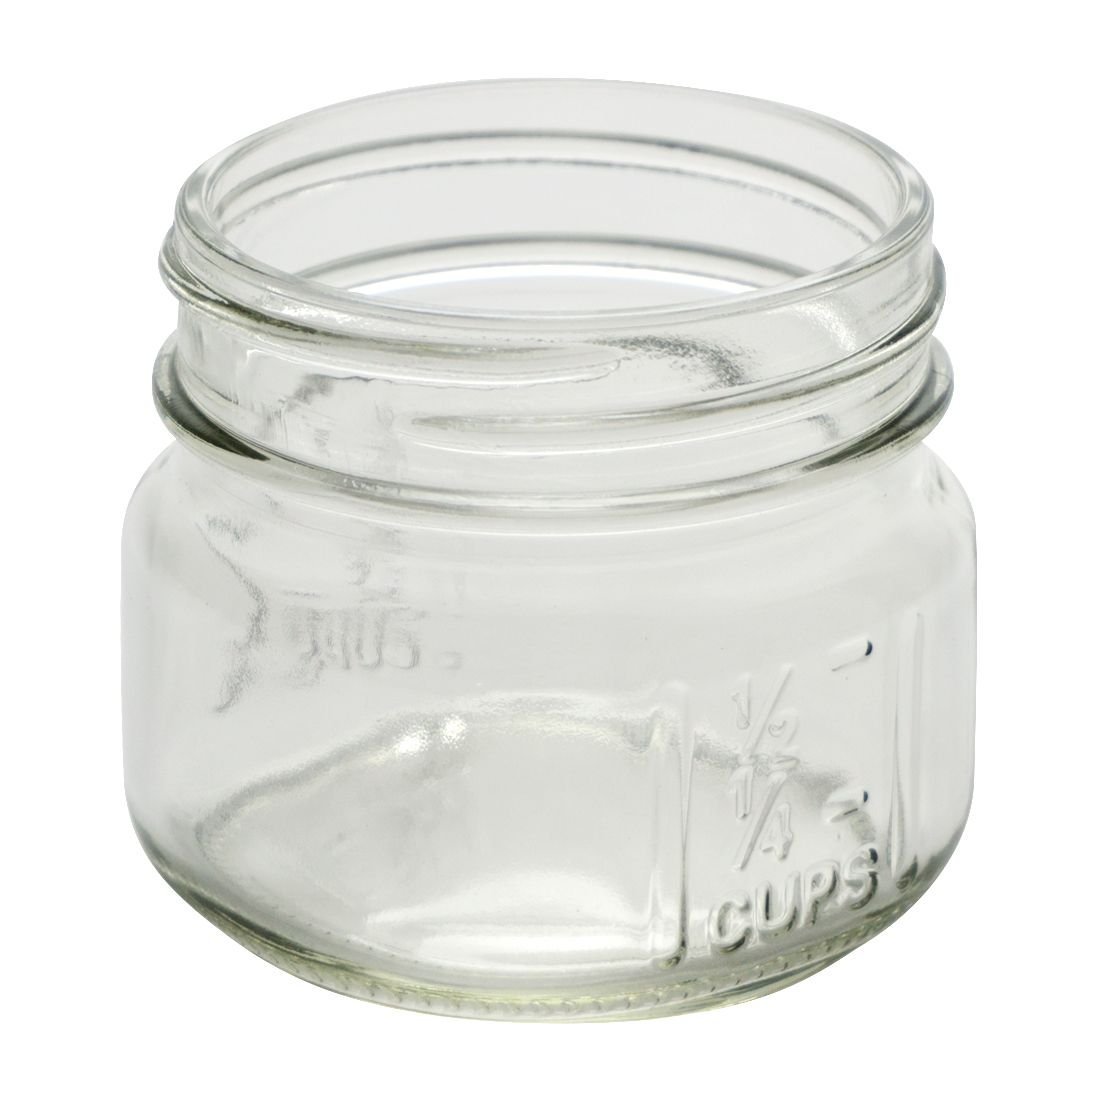 NMS 4 Ounce Glass Regular Mouth Square Mason Canning Jars